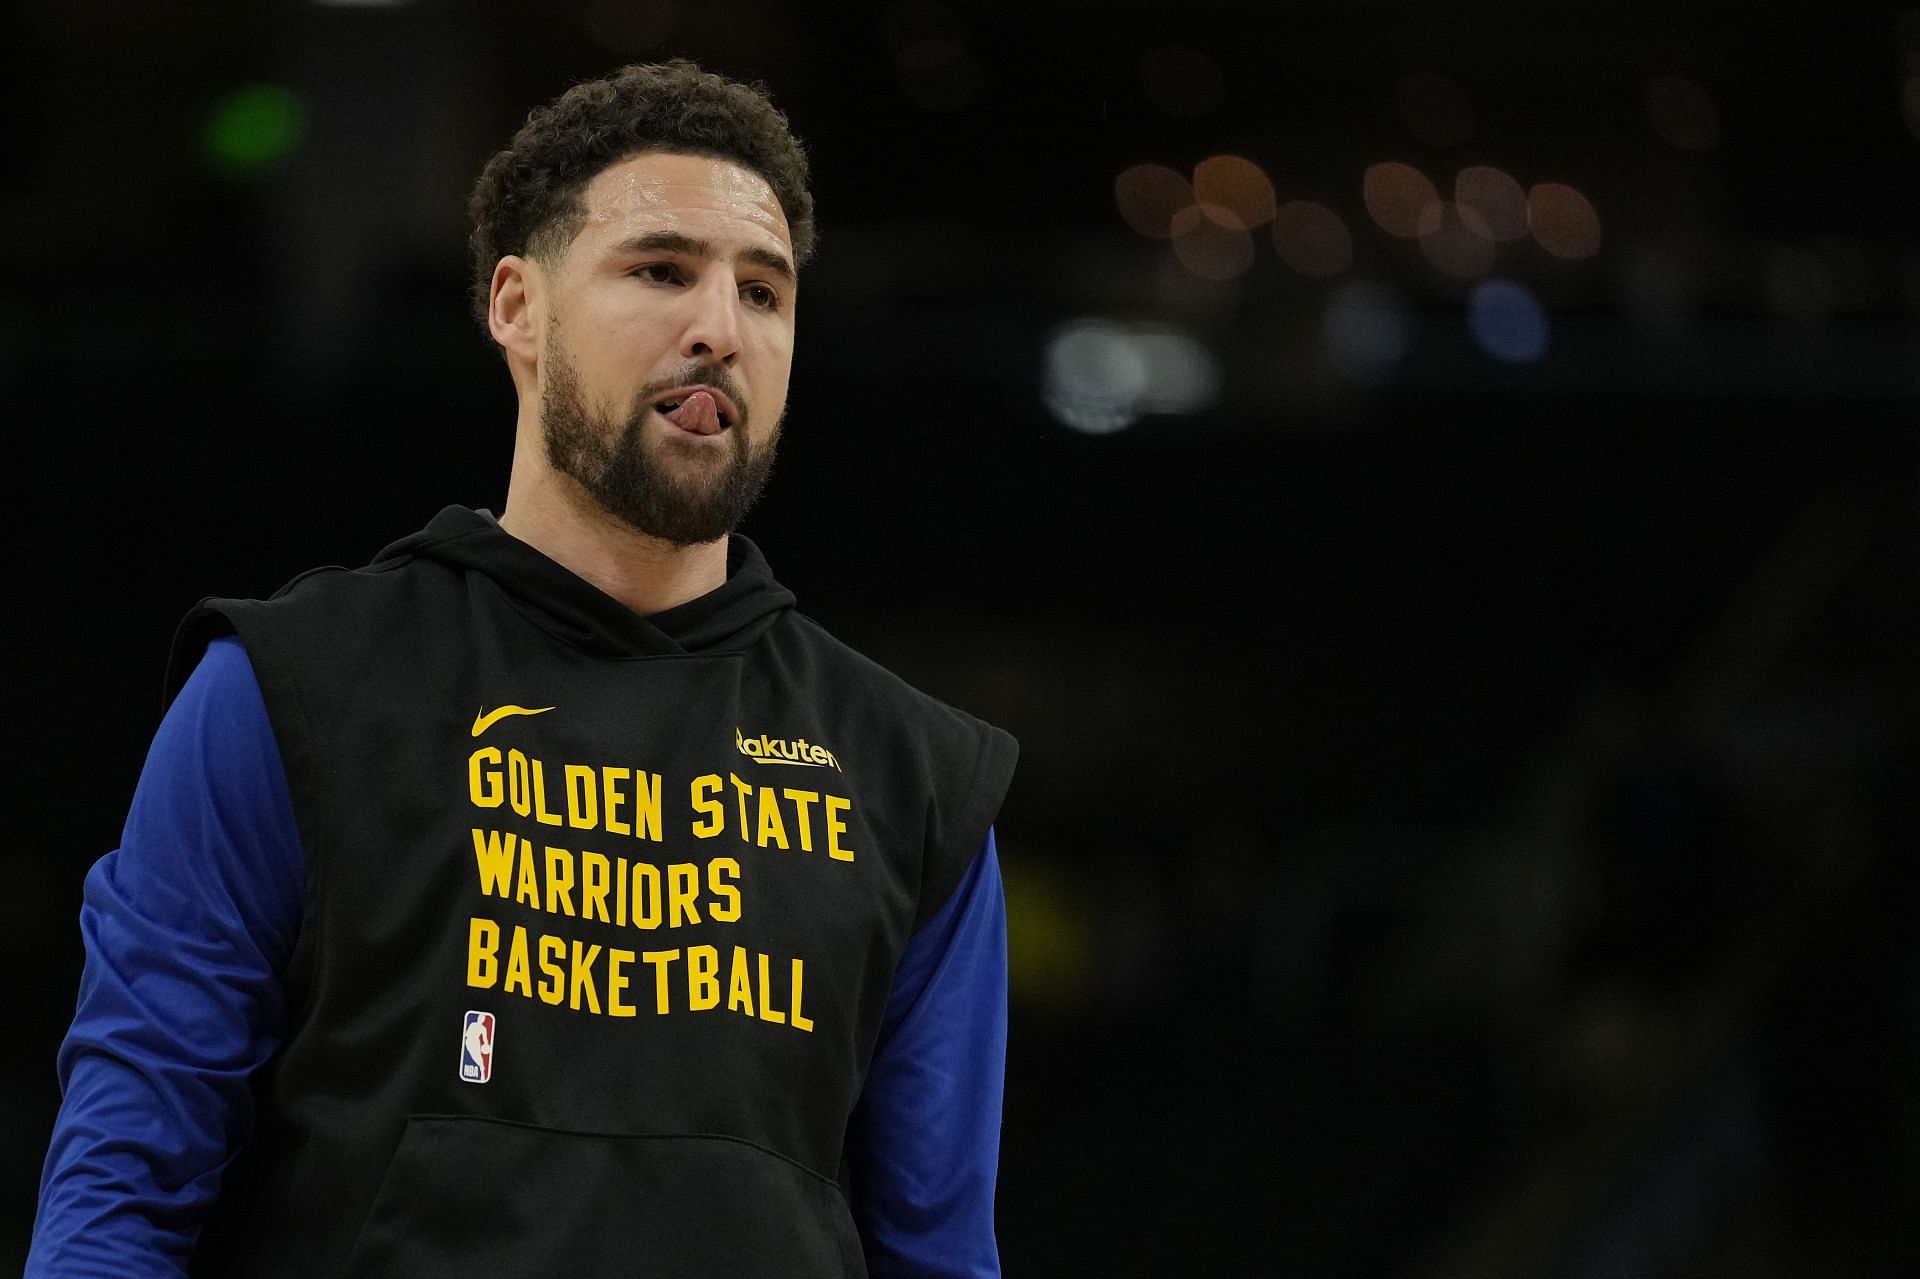 Golden State Warriors star shooting guard Klay Thompson